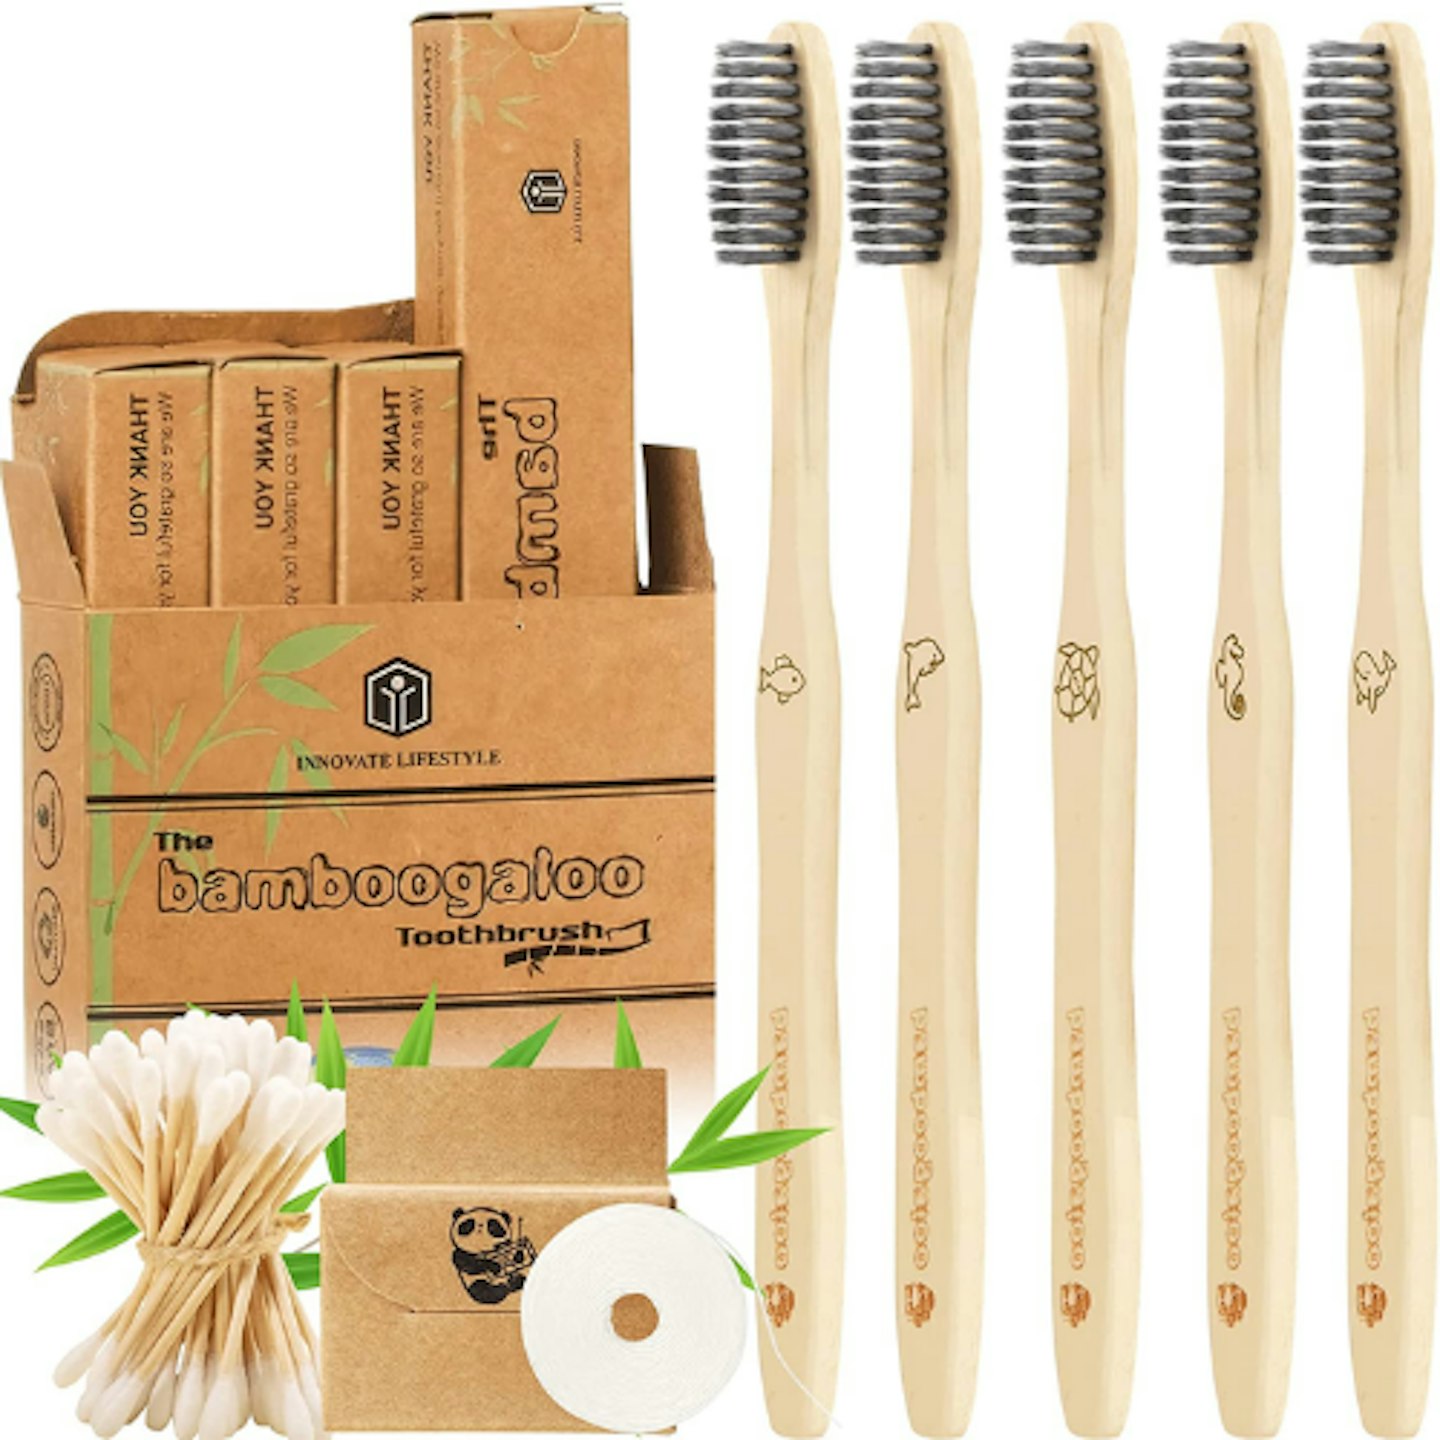 Bamboogaloo Charcoal Bamboo ECO Dent Toothbrushes, 5 Pack